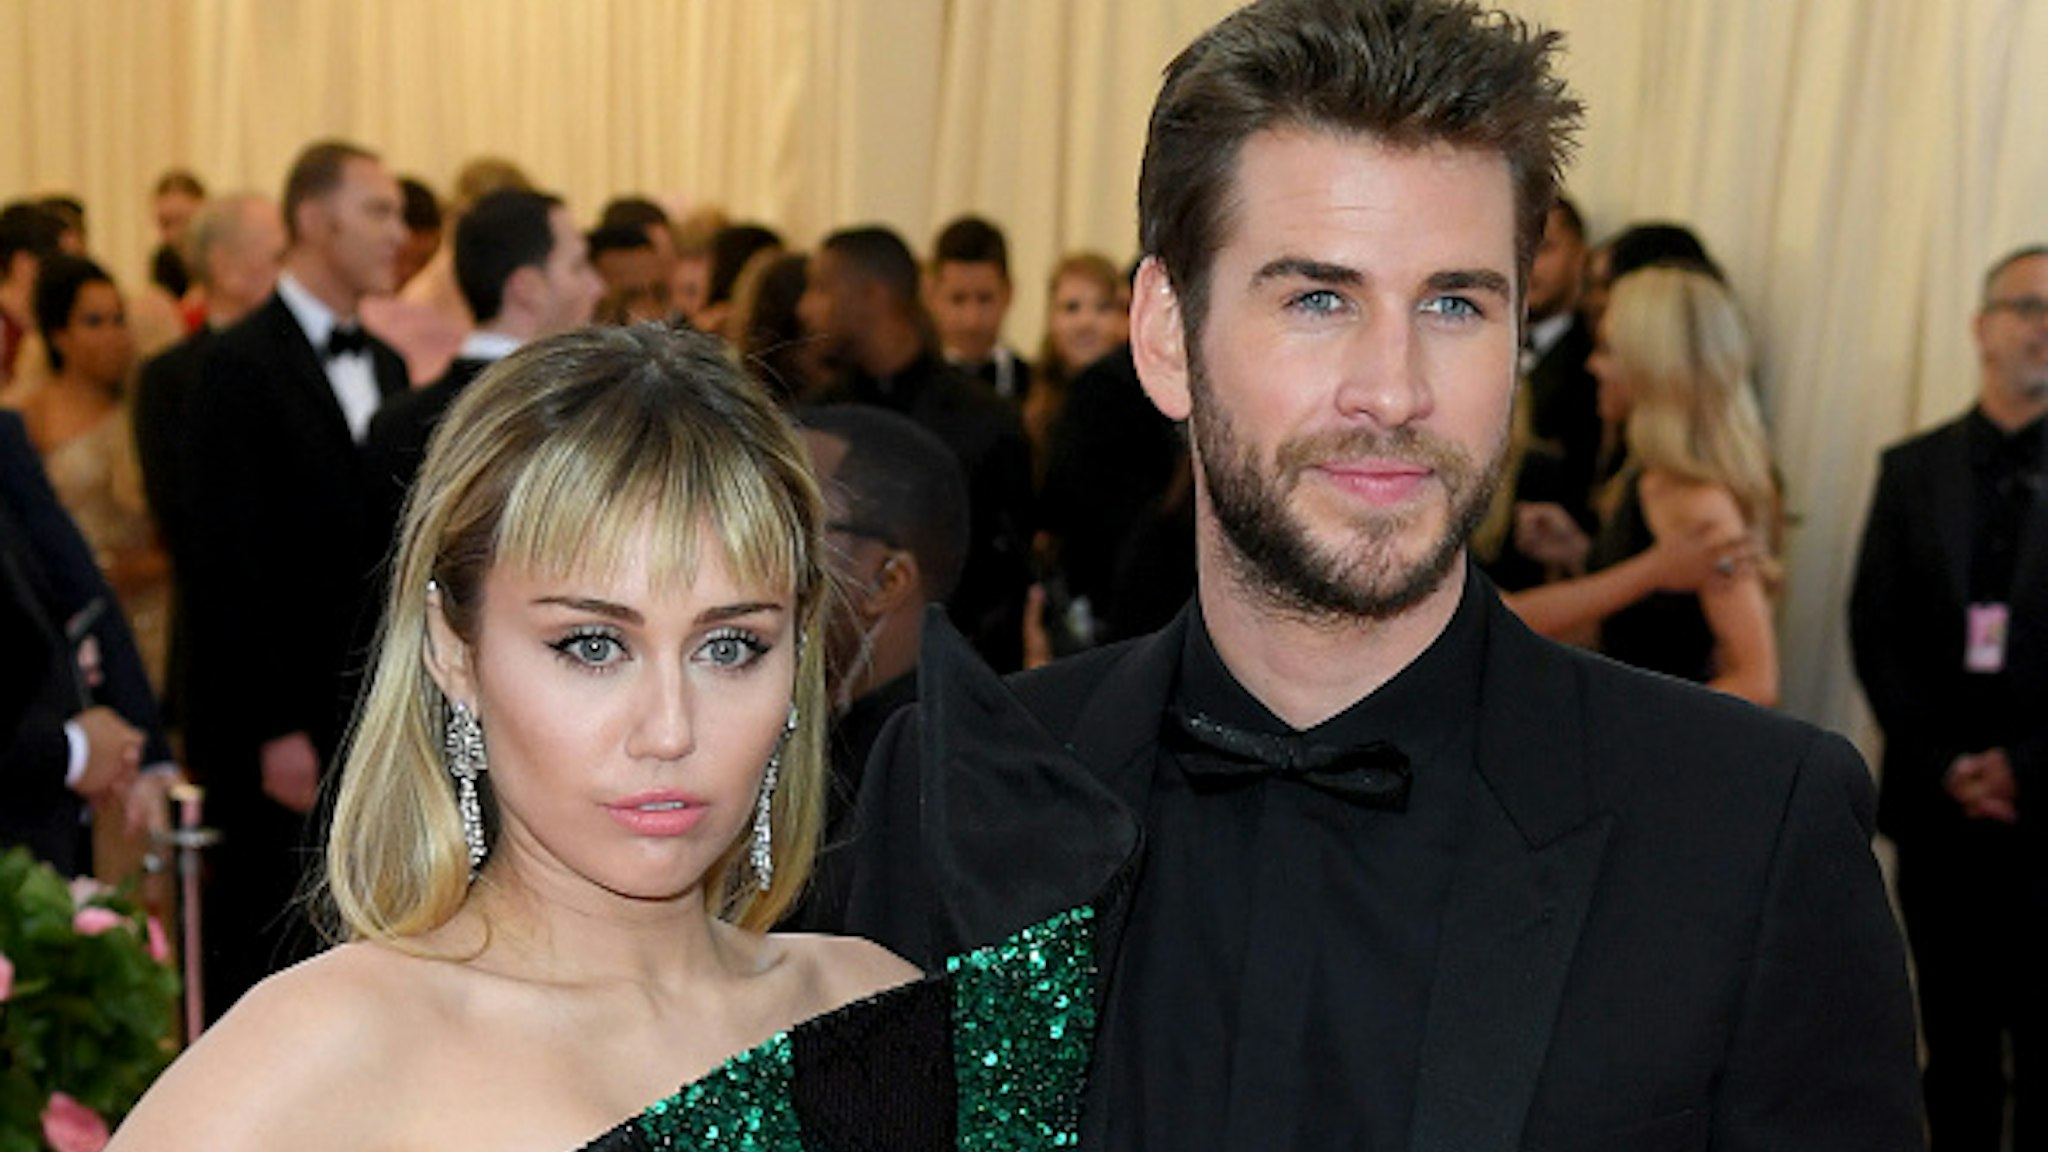 Miley Cyrus and Liam Hemsworth attend The 2019 Met Gala Celebrating Camp: Notes On Fashion at The Metropolitan Museum of Art on May 06, 2019 in New York City.